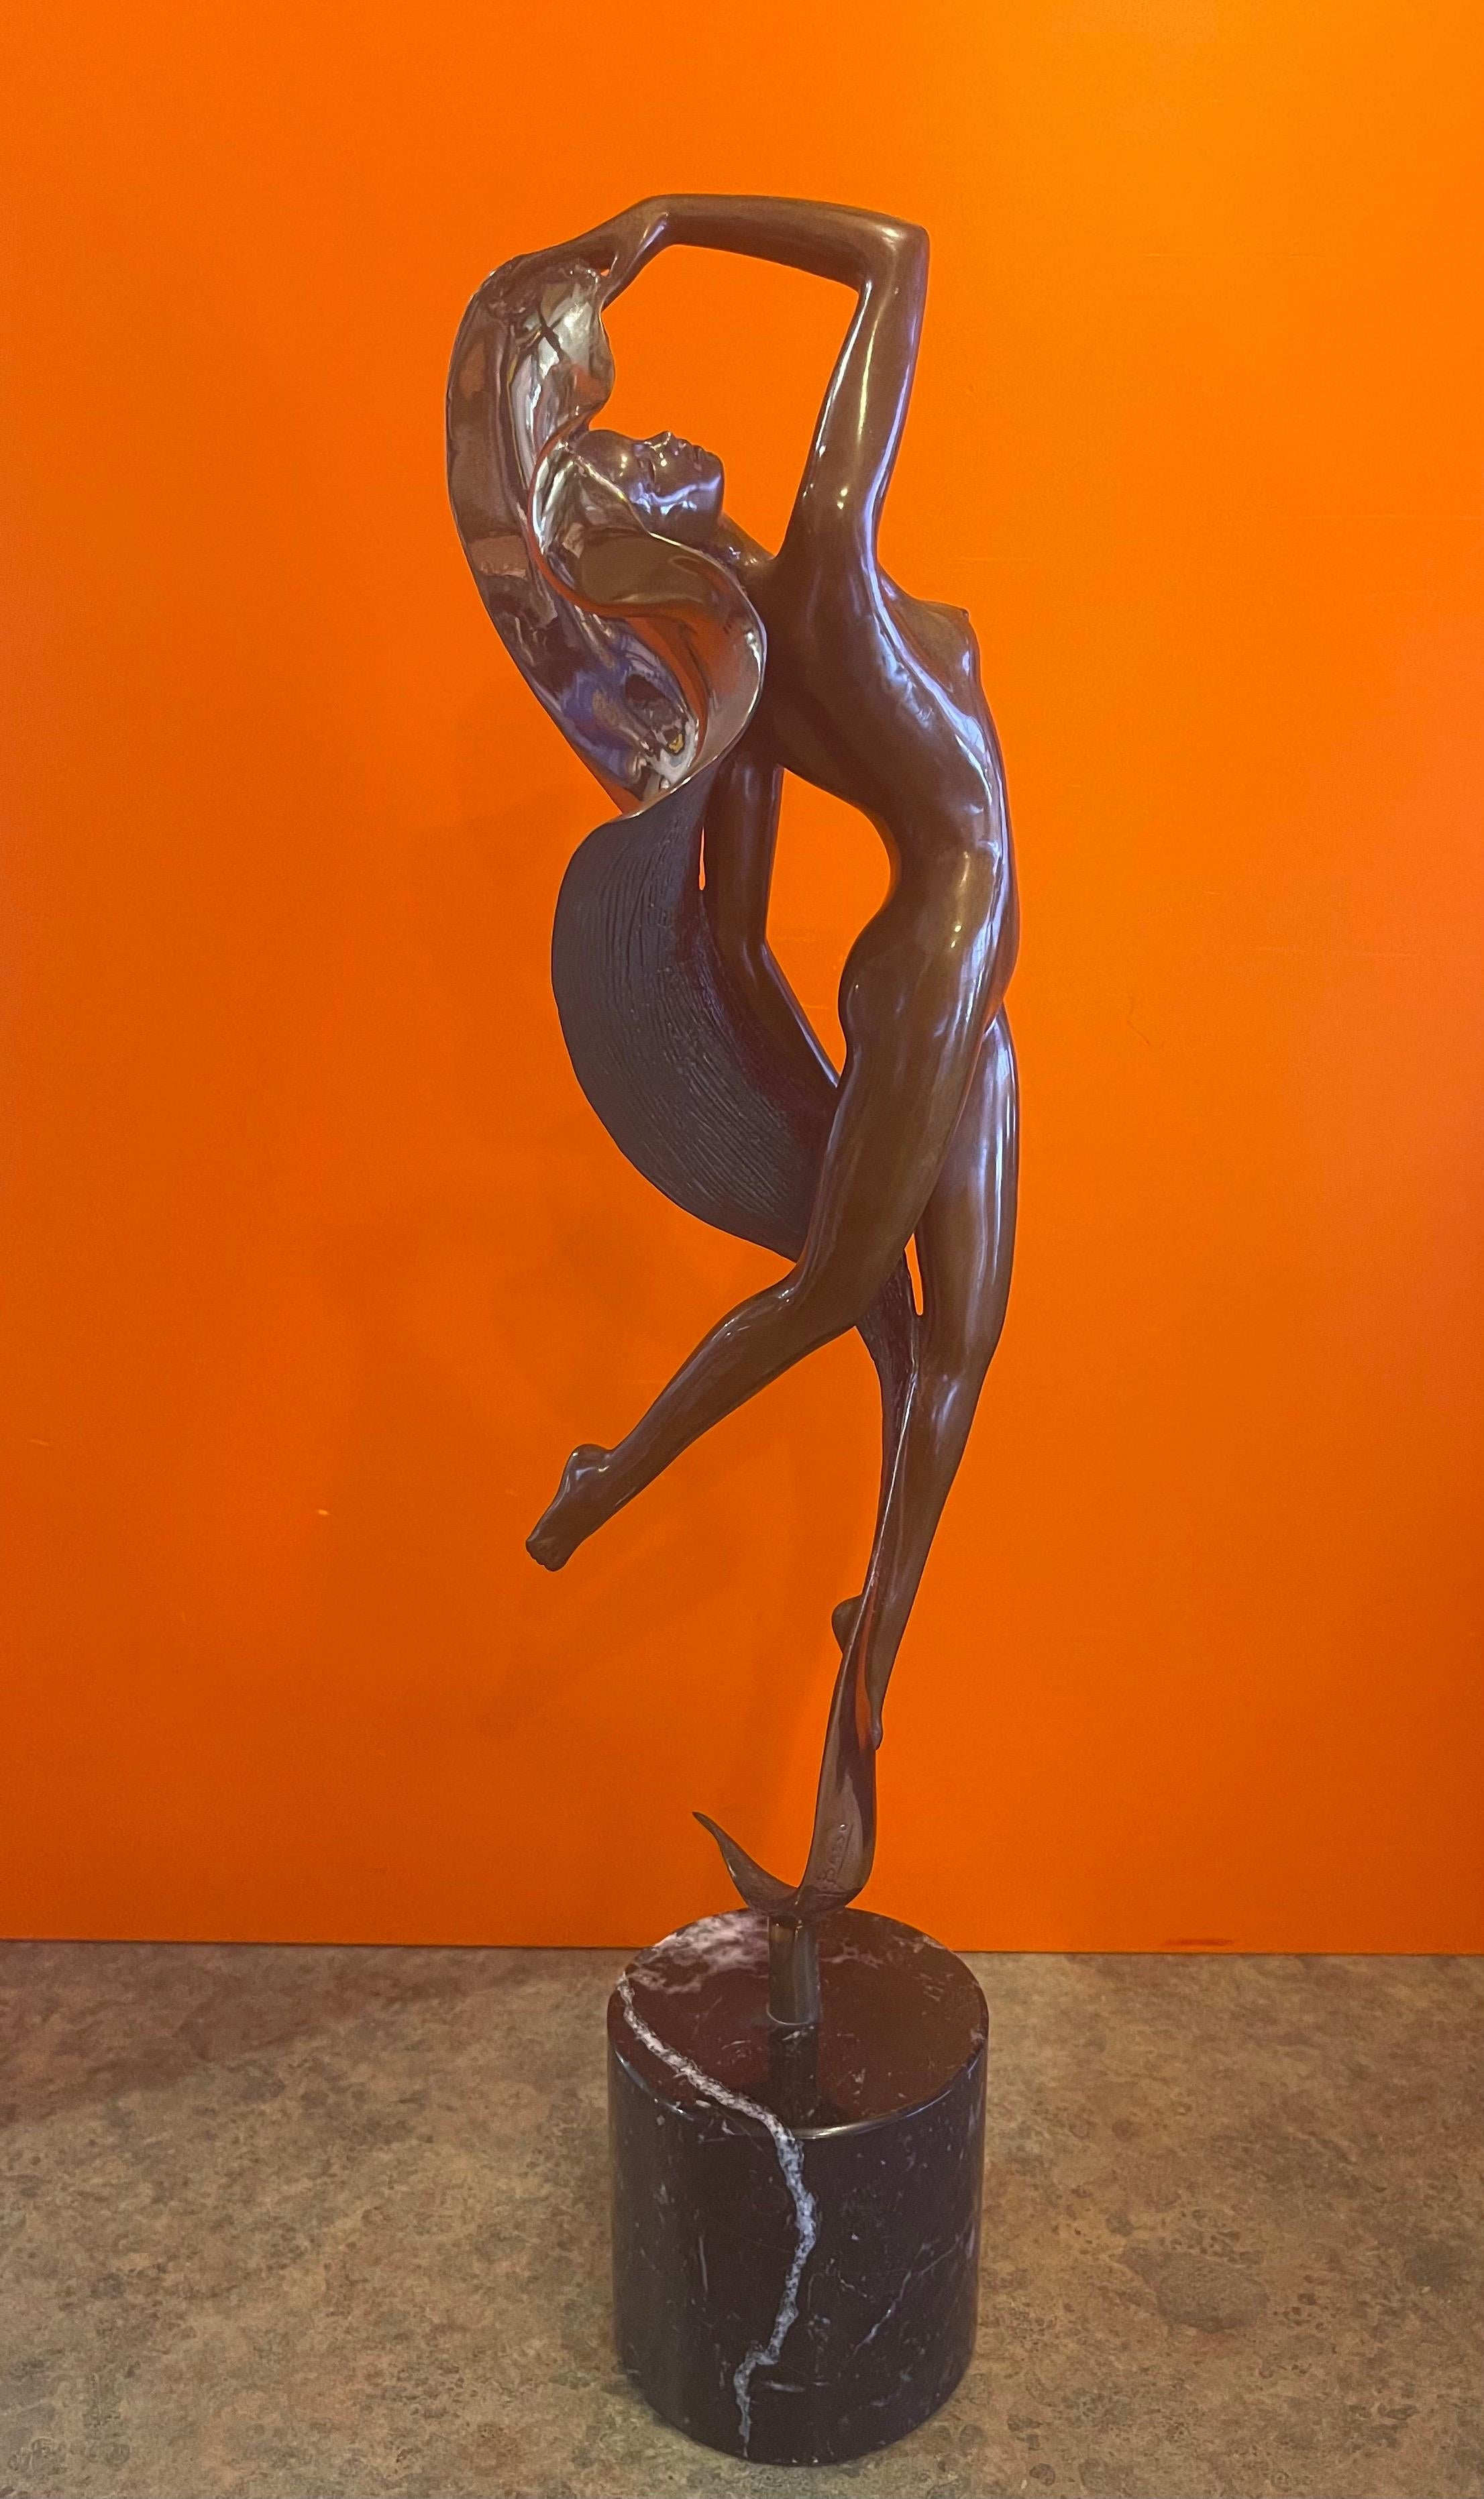 Wonderful Art Deco bronze sculpture on a black marble base by Angelo Basso, circa 1986. The piece depicts an elegant young topless woman dancing with whirling sash. Delicate patination is complemented by highly polished bronze which adds grace and